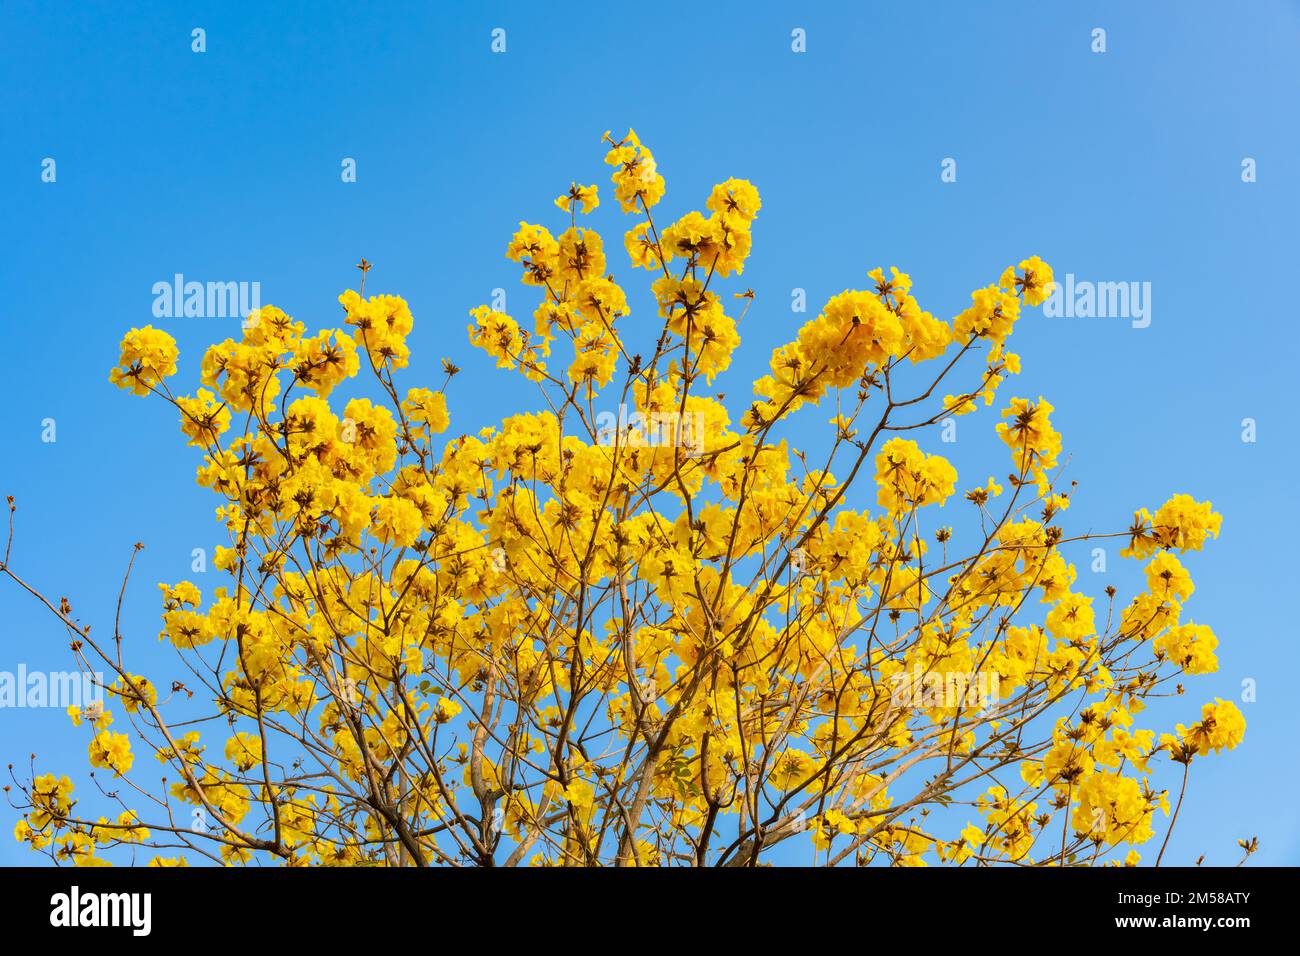 blooming Guayacan or Handroanthus chrysanthus or Golden Bell Tree horizontal composition Stock Photo